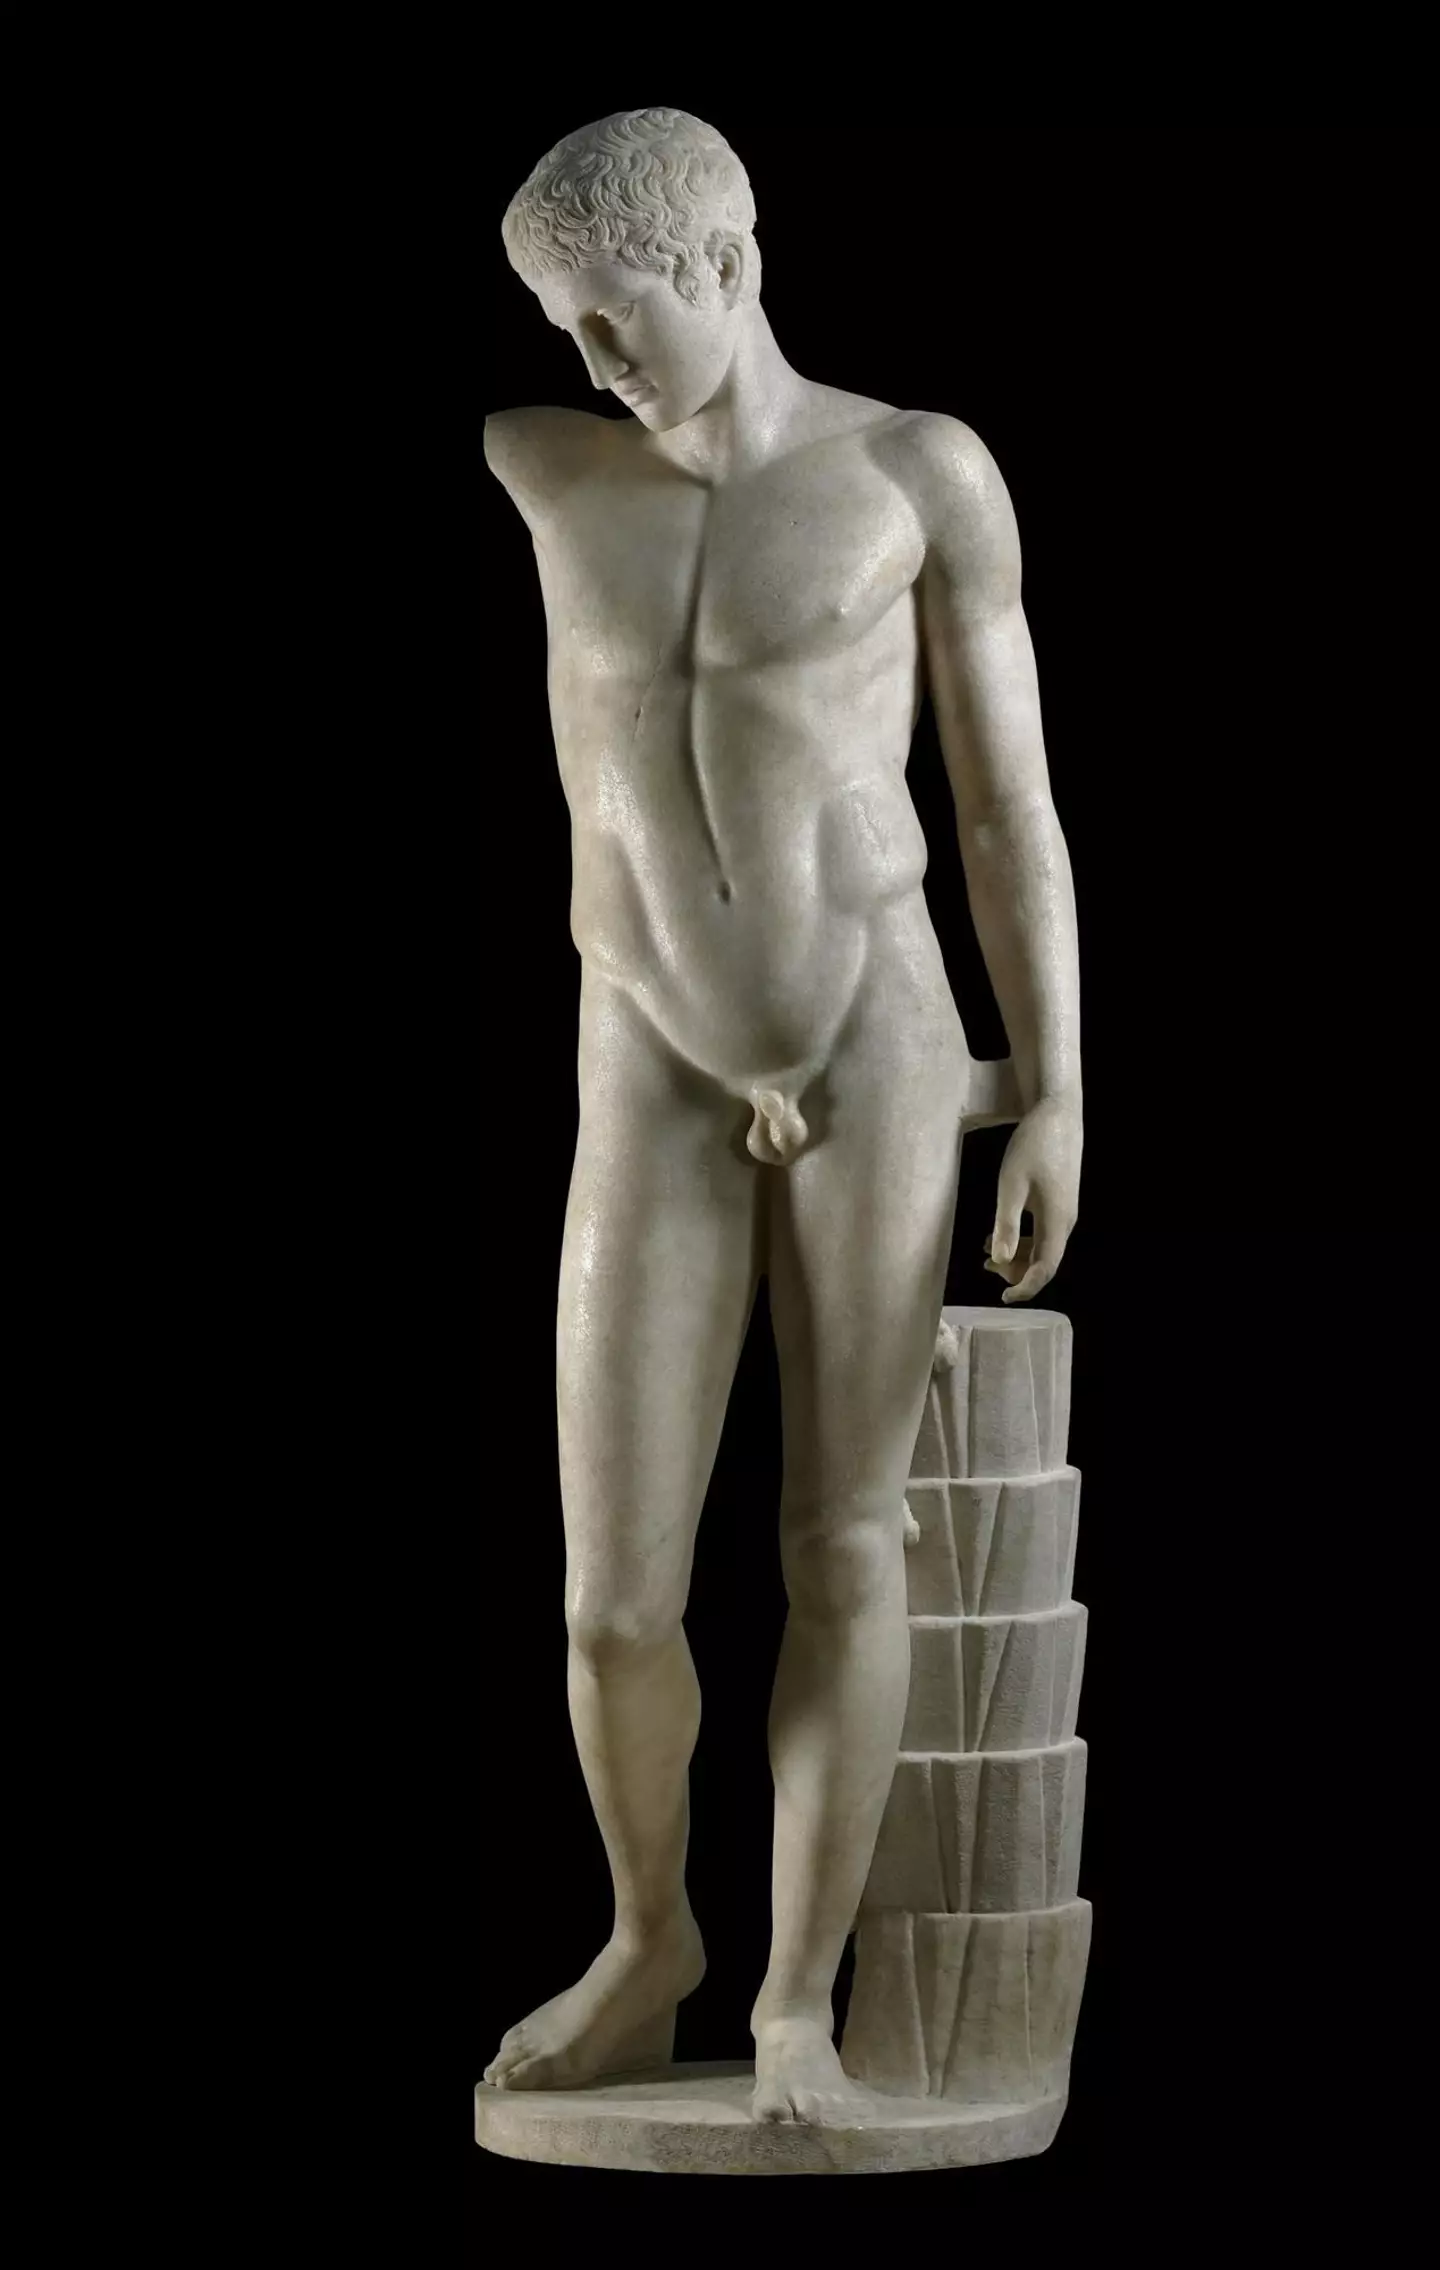 Ancient Greek statues tend to have 'very small penises, compared to the average of humanity'.